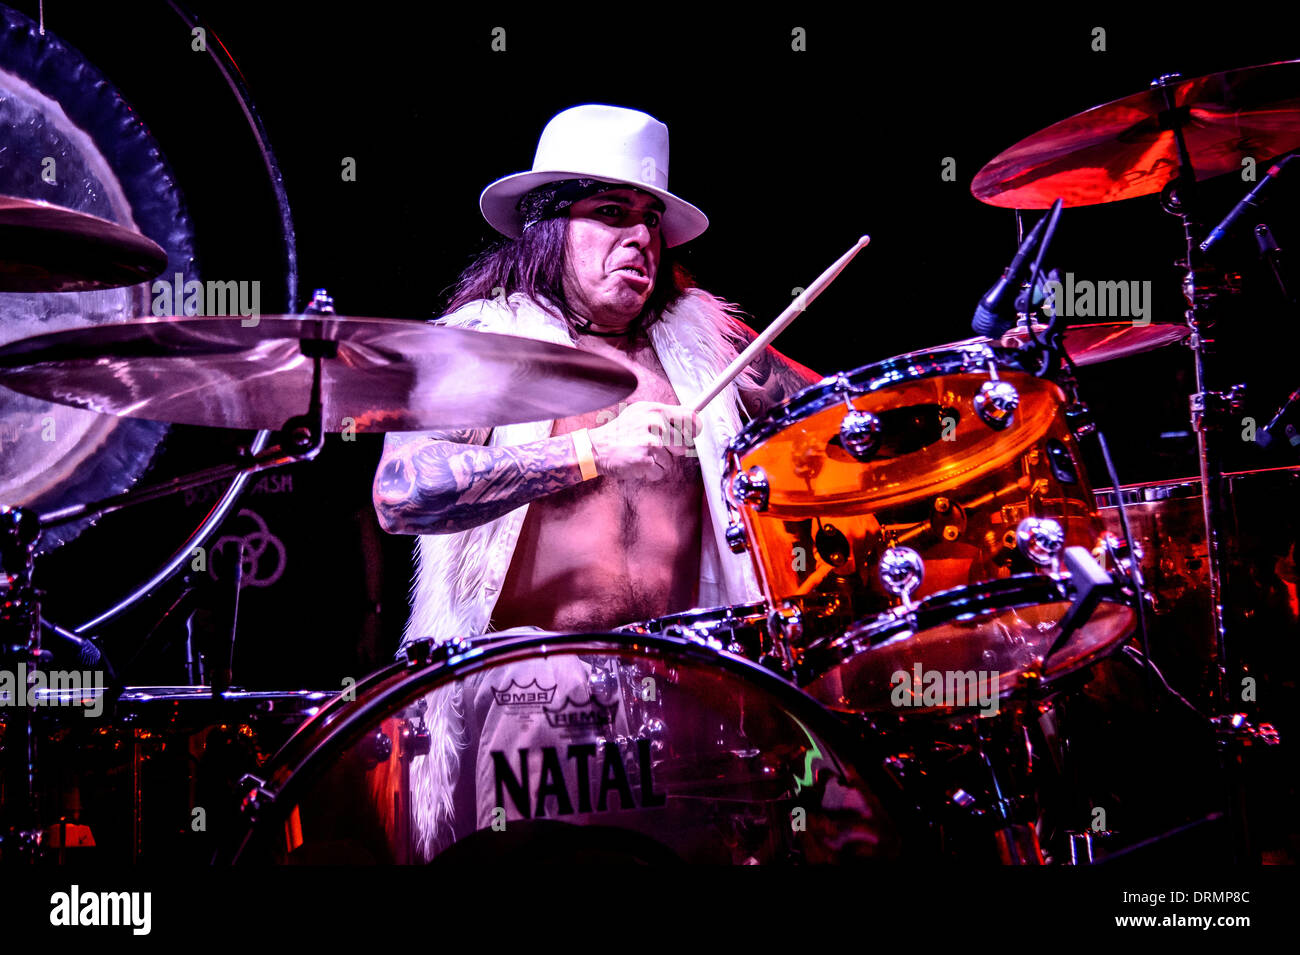 Toronto, Ontario, Canada. 24th Jan, 2014. JIMMY D'ANDA. The Bonzo Bash, it is the ultimate celebration for the ultimate drummer, John Henry Bonham of Led Zeppelin. It is presented by Natal and Marshall and is a night filled with amazing drummers playing their favorite Led Zeppelin song. It is a complete evening of Led Zeppelin jams and this year was a crazy one! It was be hosted by Mike Portnoy, Carmine Appice and the show creator, Brian Tichy at The Observatory club in Santa Ana, CA. © Igor Vidyashev/ZUMAPRESS.com/Alamy Live News Stock Photo